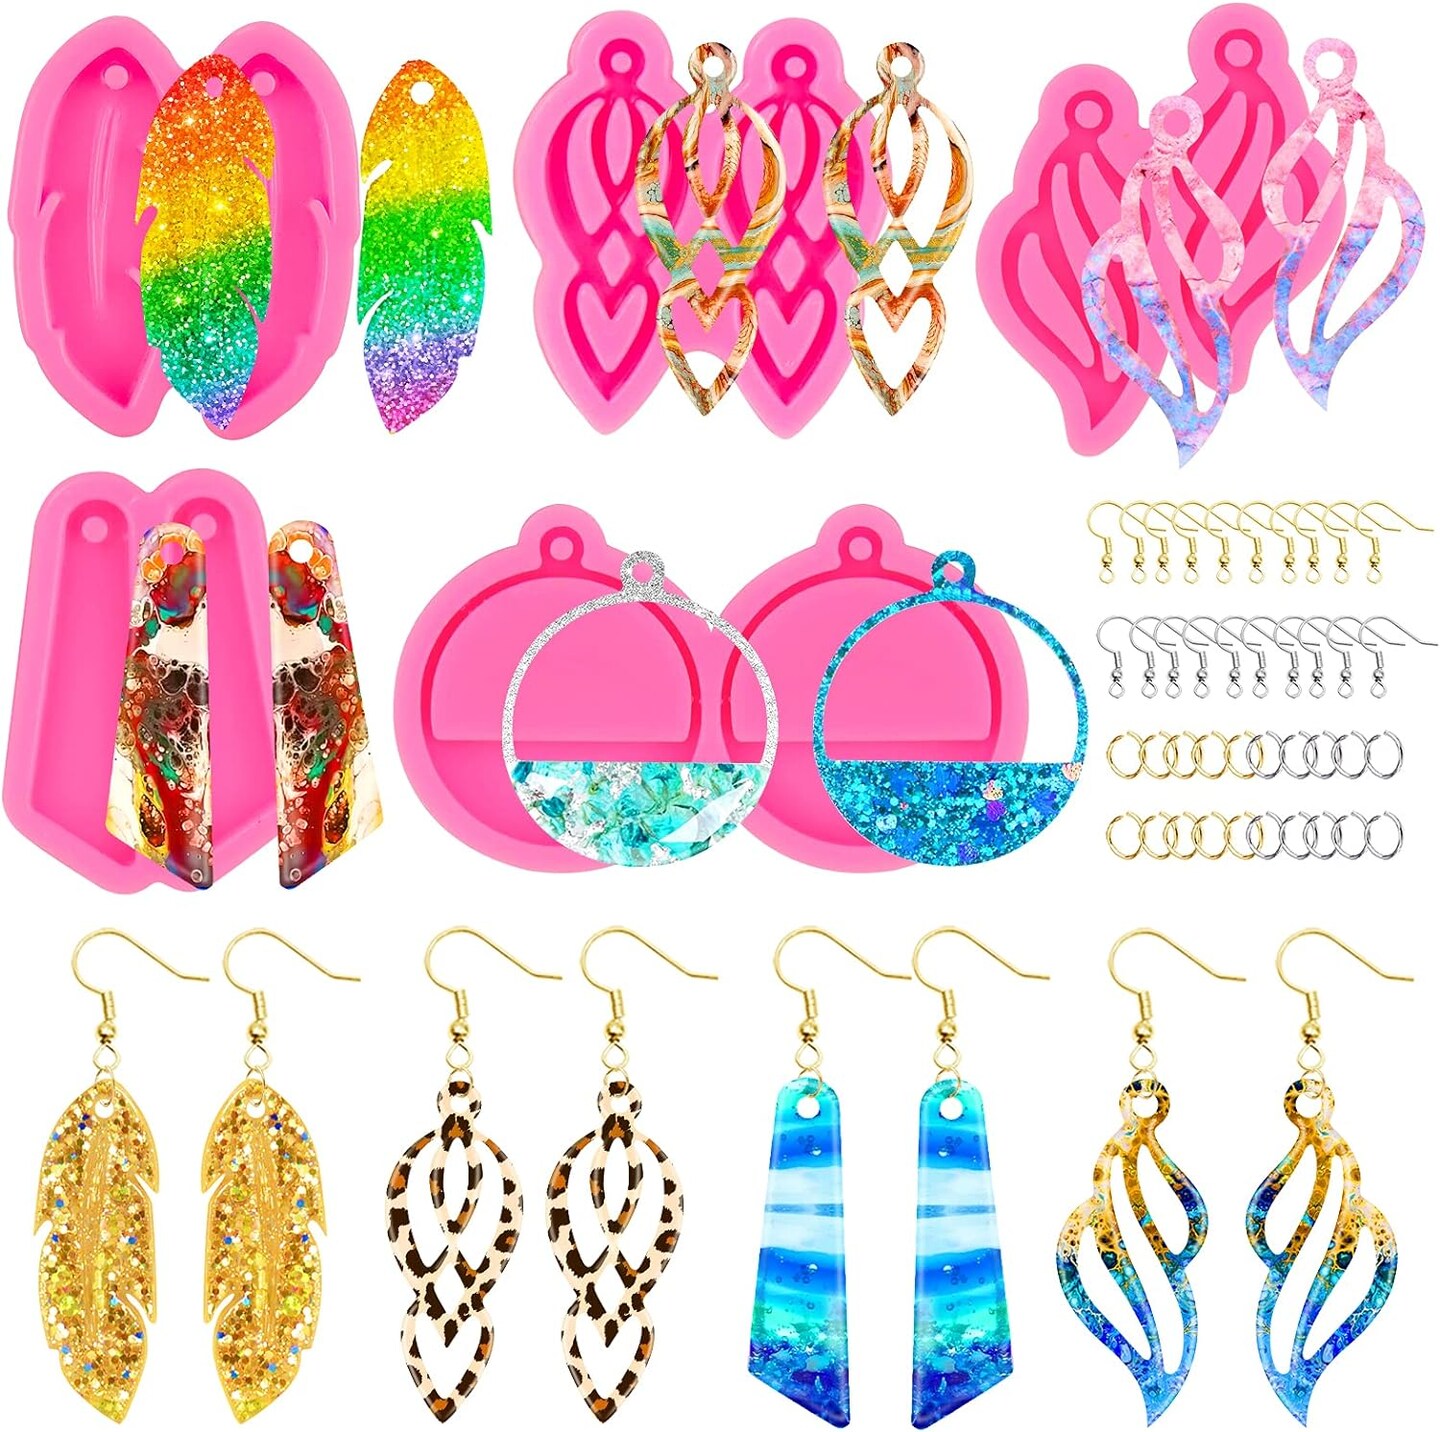 95pcs Resin Jewelry Molds Kit, 5 Pairs Earring Silicone Molds Epoxy Casting Molds with Hole, Sets of Earring Hooks, Jump Ring, Eye Pins for Resin Jewelry, Pendant, Key Chains